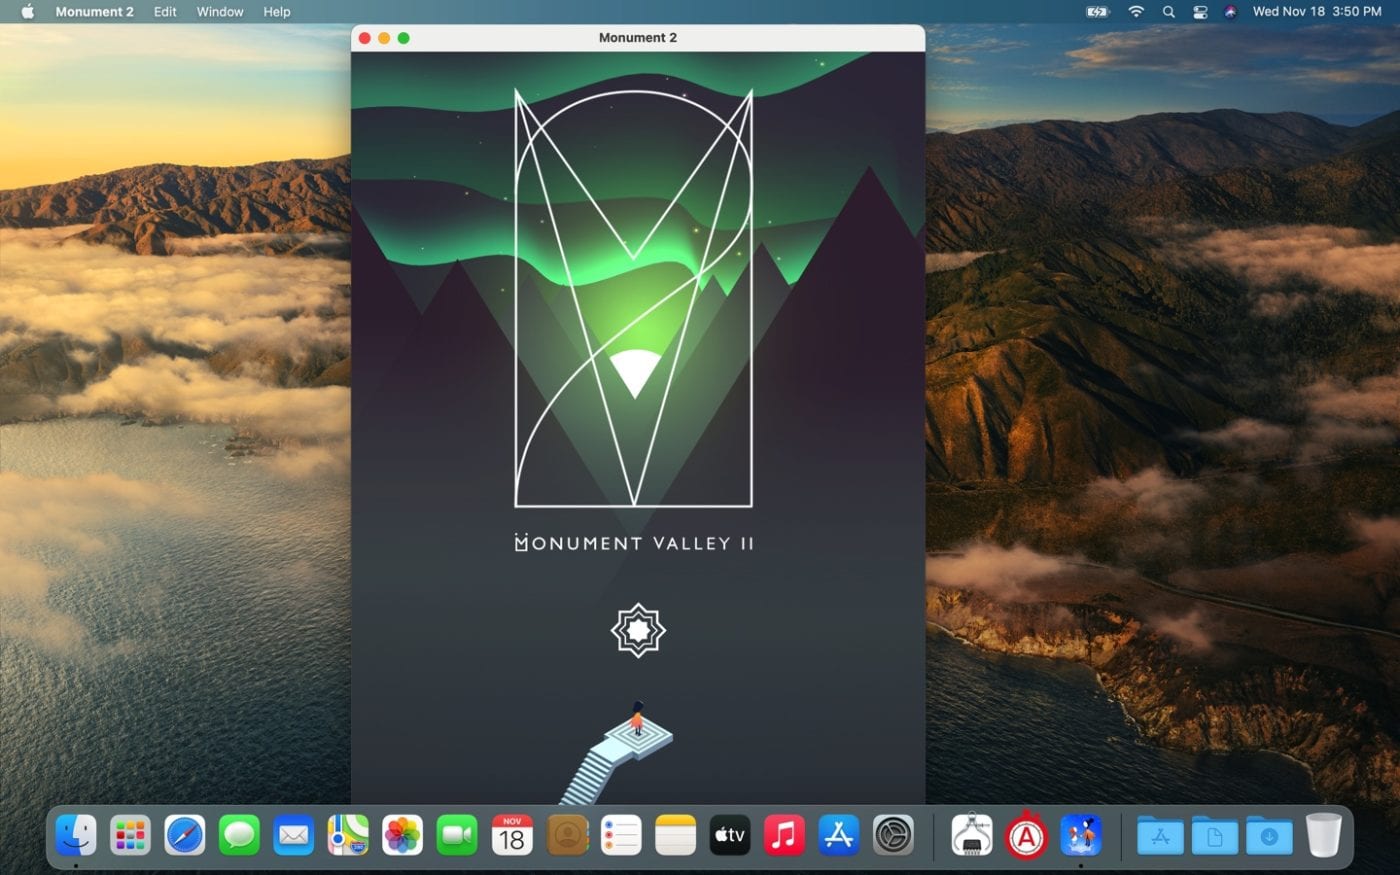 Monument Valley II -- an iPad app -- playing on the M1 MacBook Air